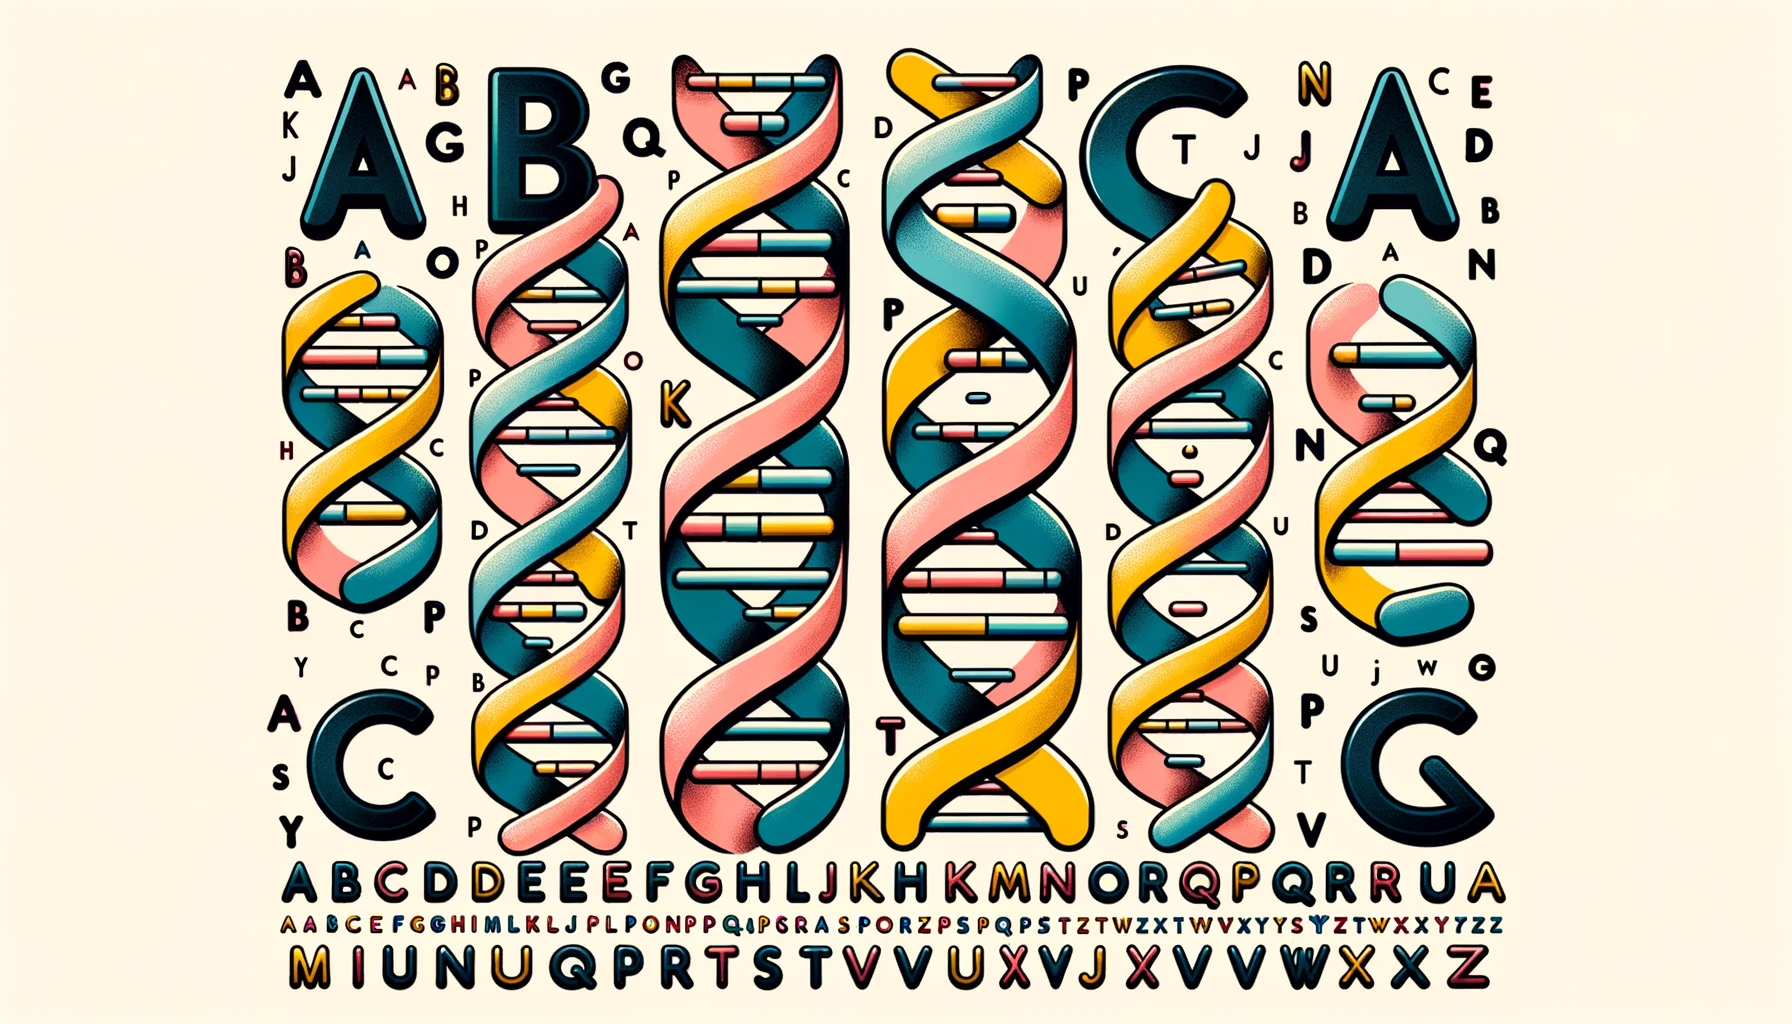 An illustration comparing alphabets from a foreign language with DNA nucleotides.